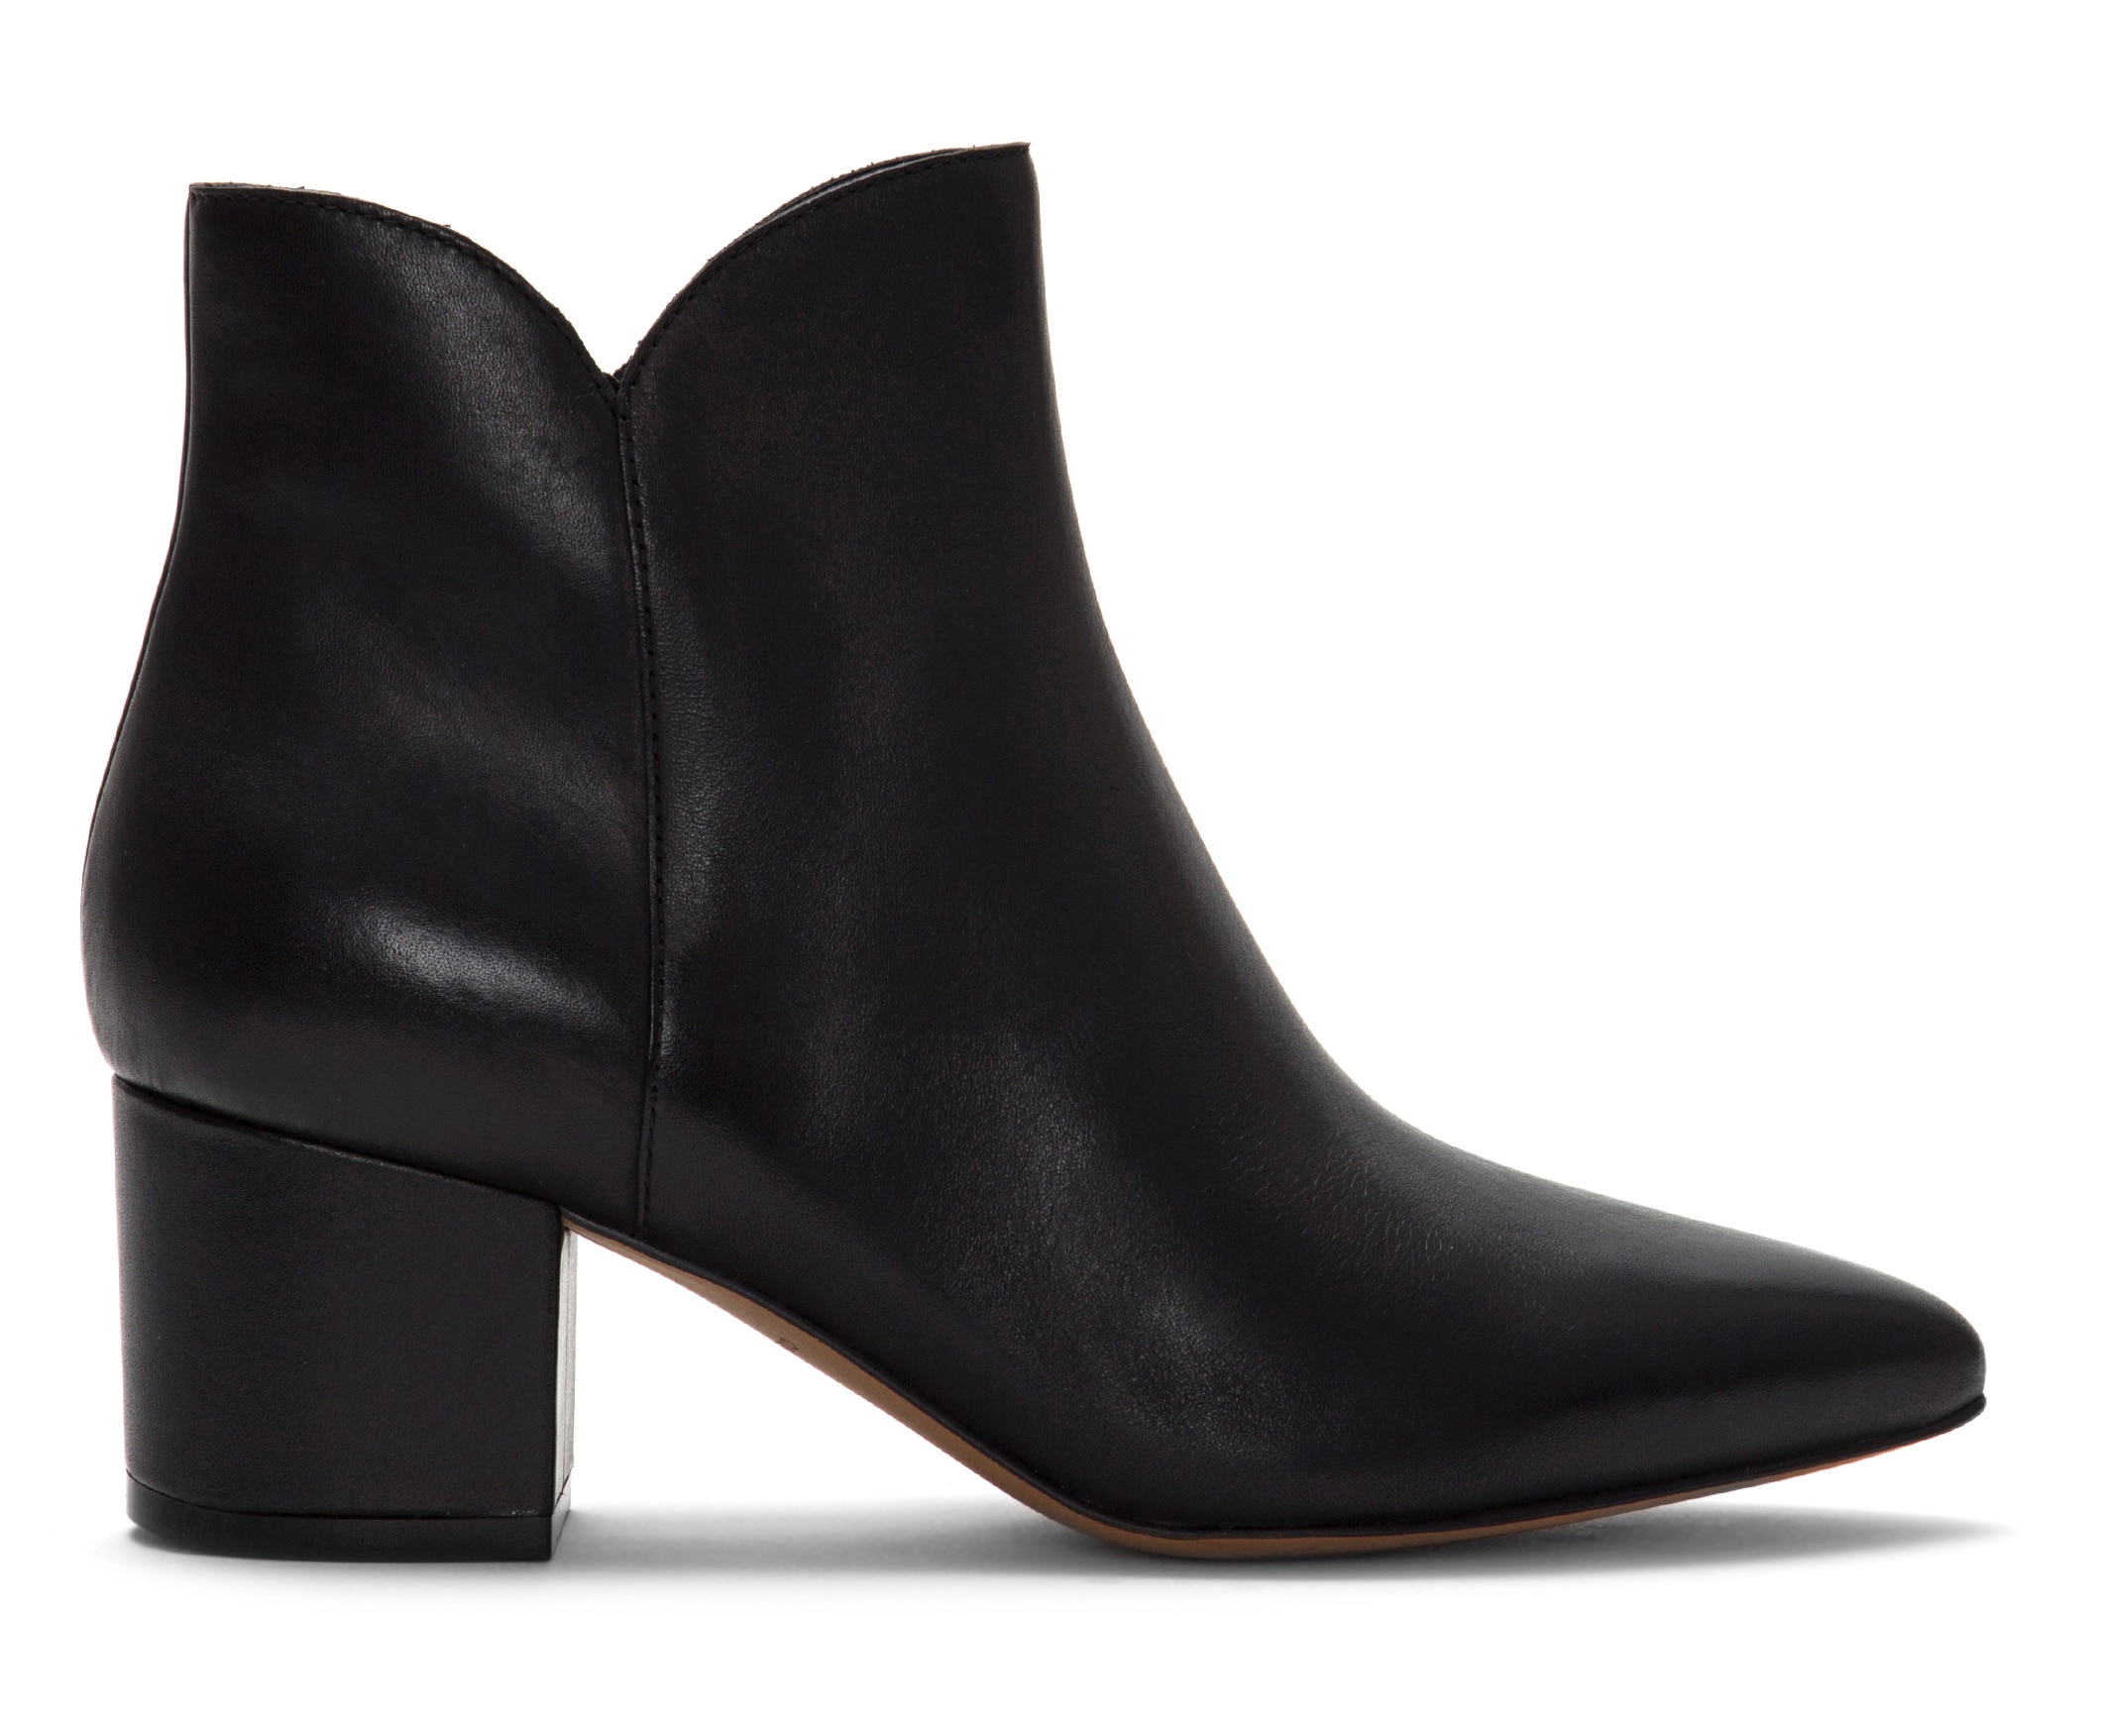 Clothing & Shoes - Shoes - Boots - Cole Haan Elyse Bootie - Online